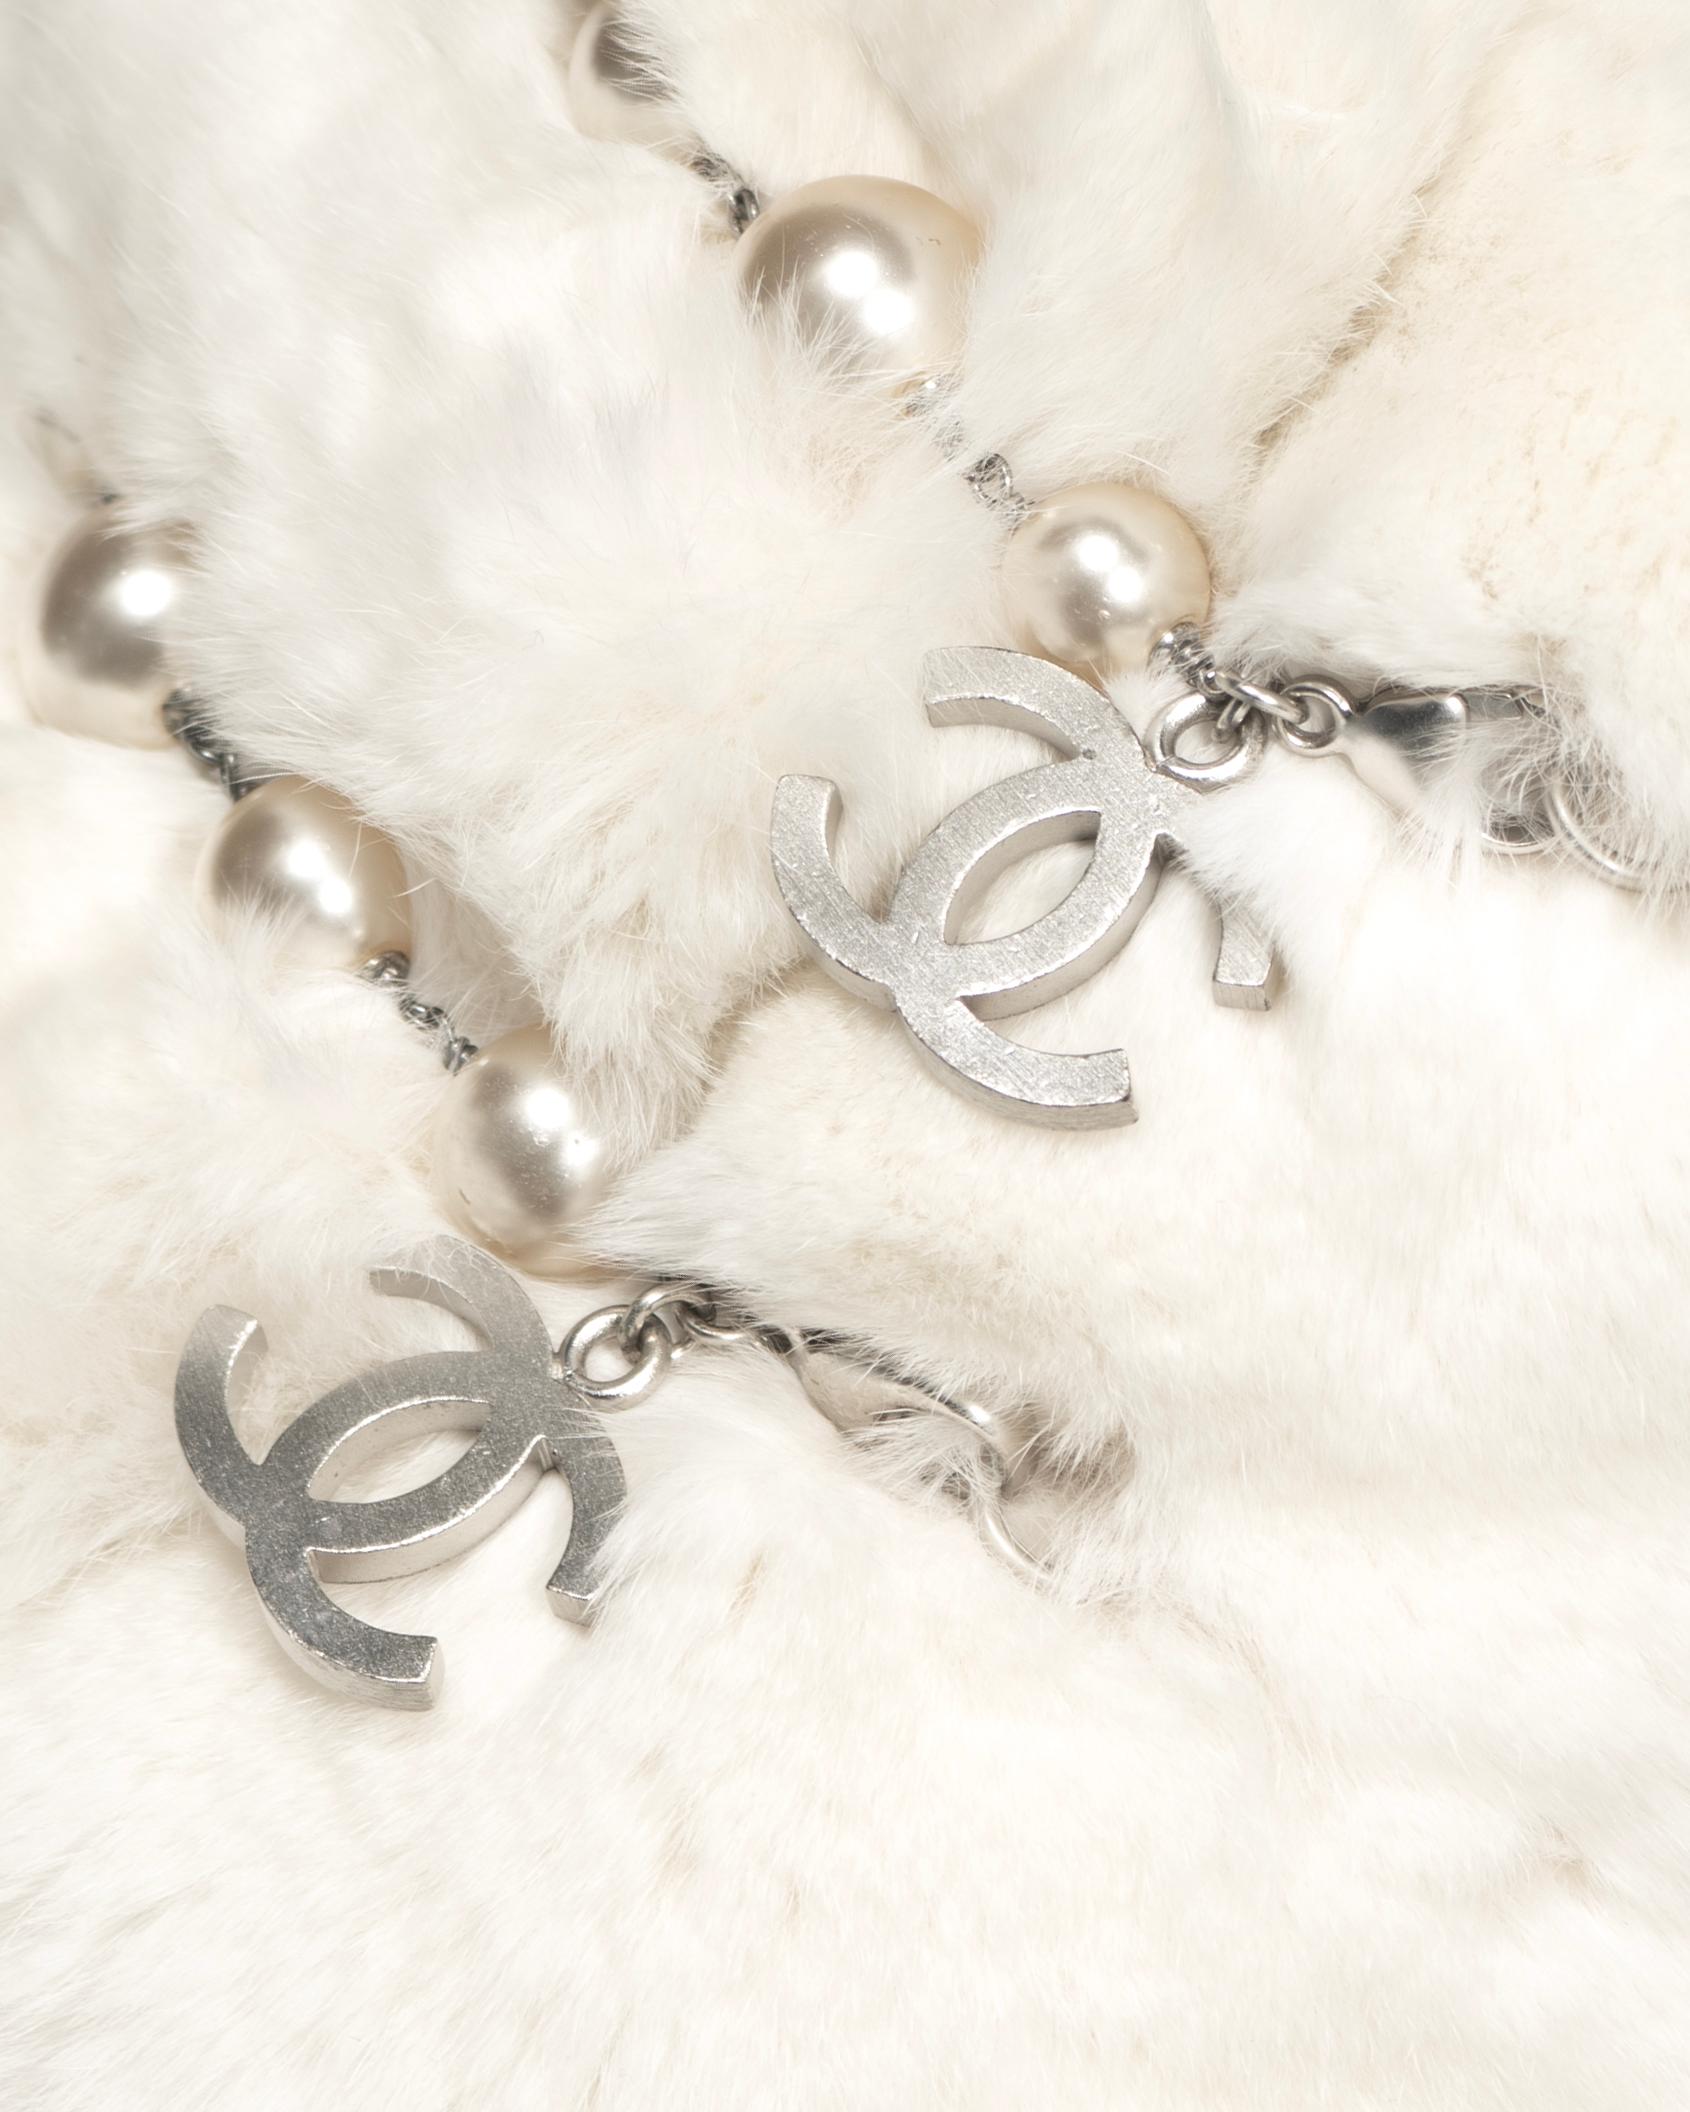 Chanel by Karl Lagerfeld White Rabbit Fur Collar and Cuffs, fw 2003 For Sale 6